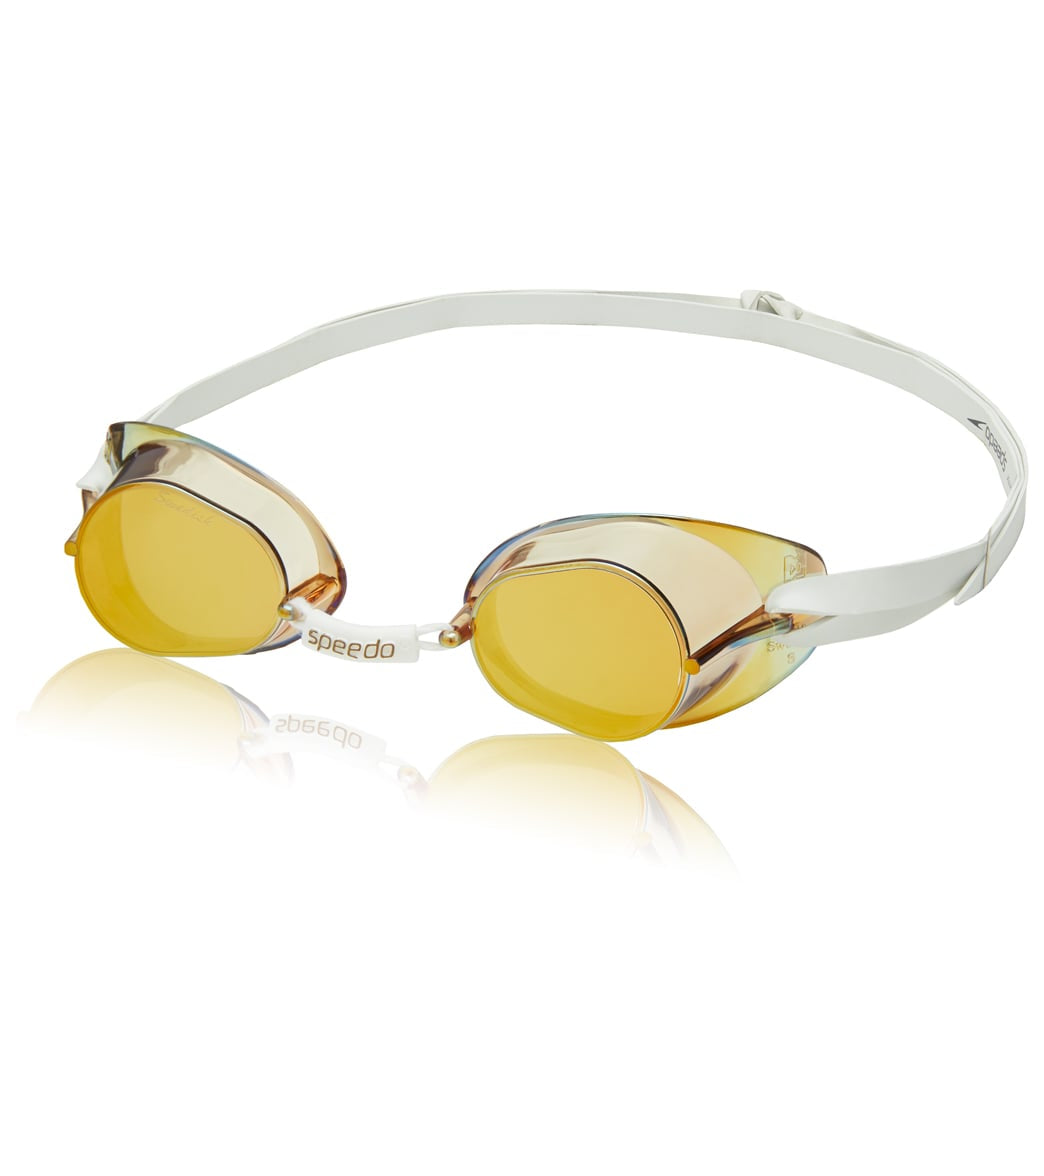 Speedo Swedish Mirrored 2 Pack Goggles at SwimOutlet.com